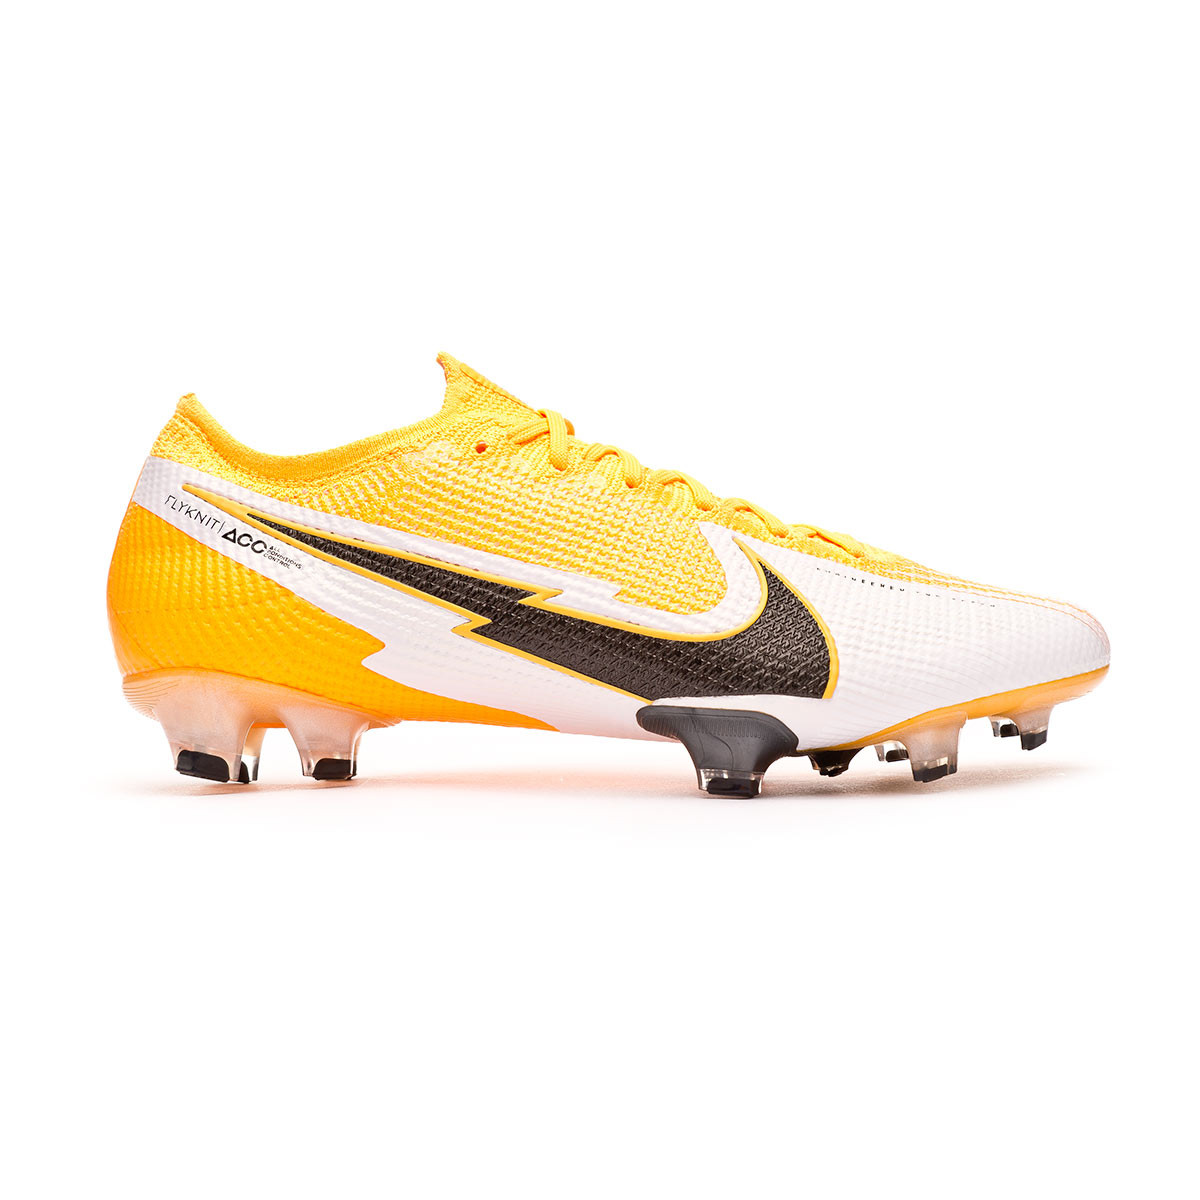 nike football shoes price 1 to 15